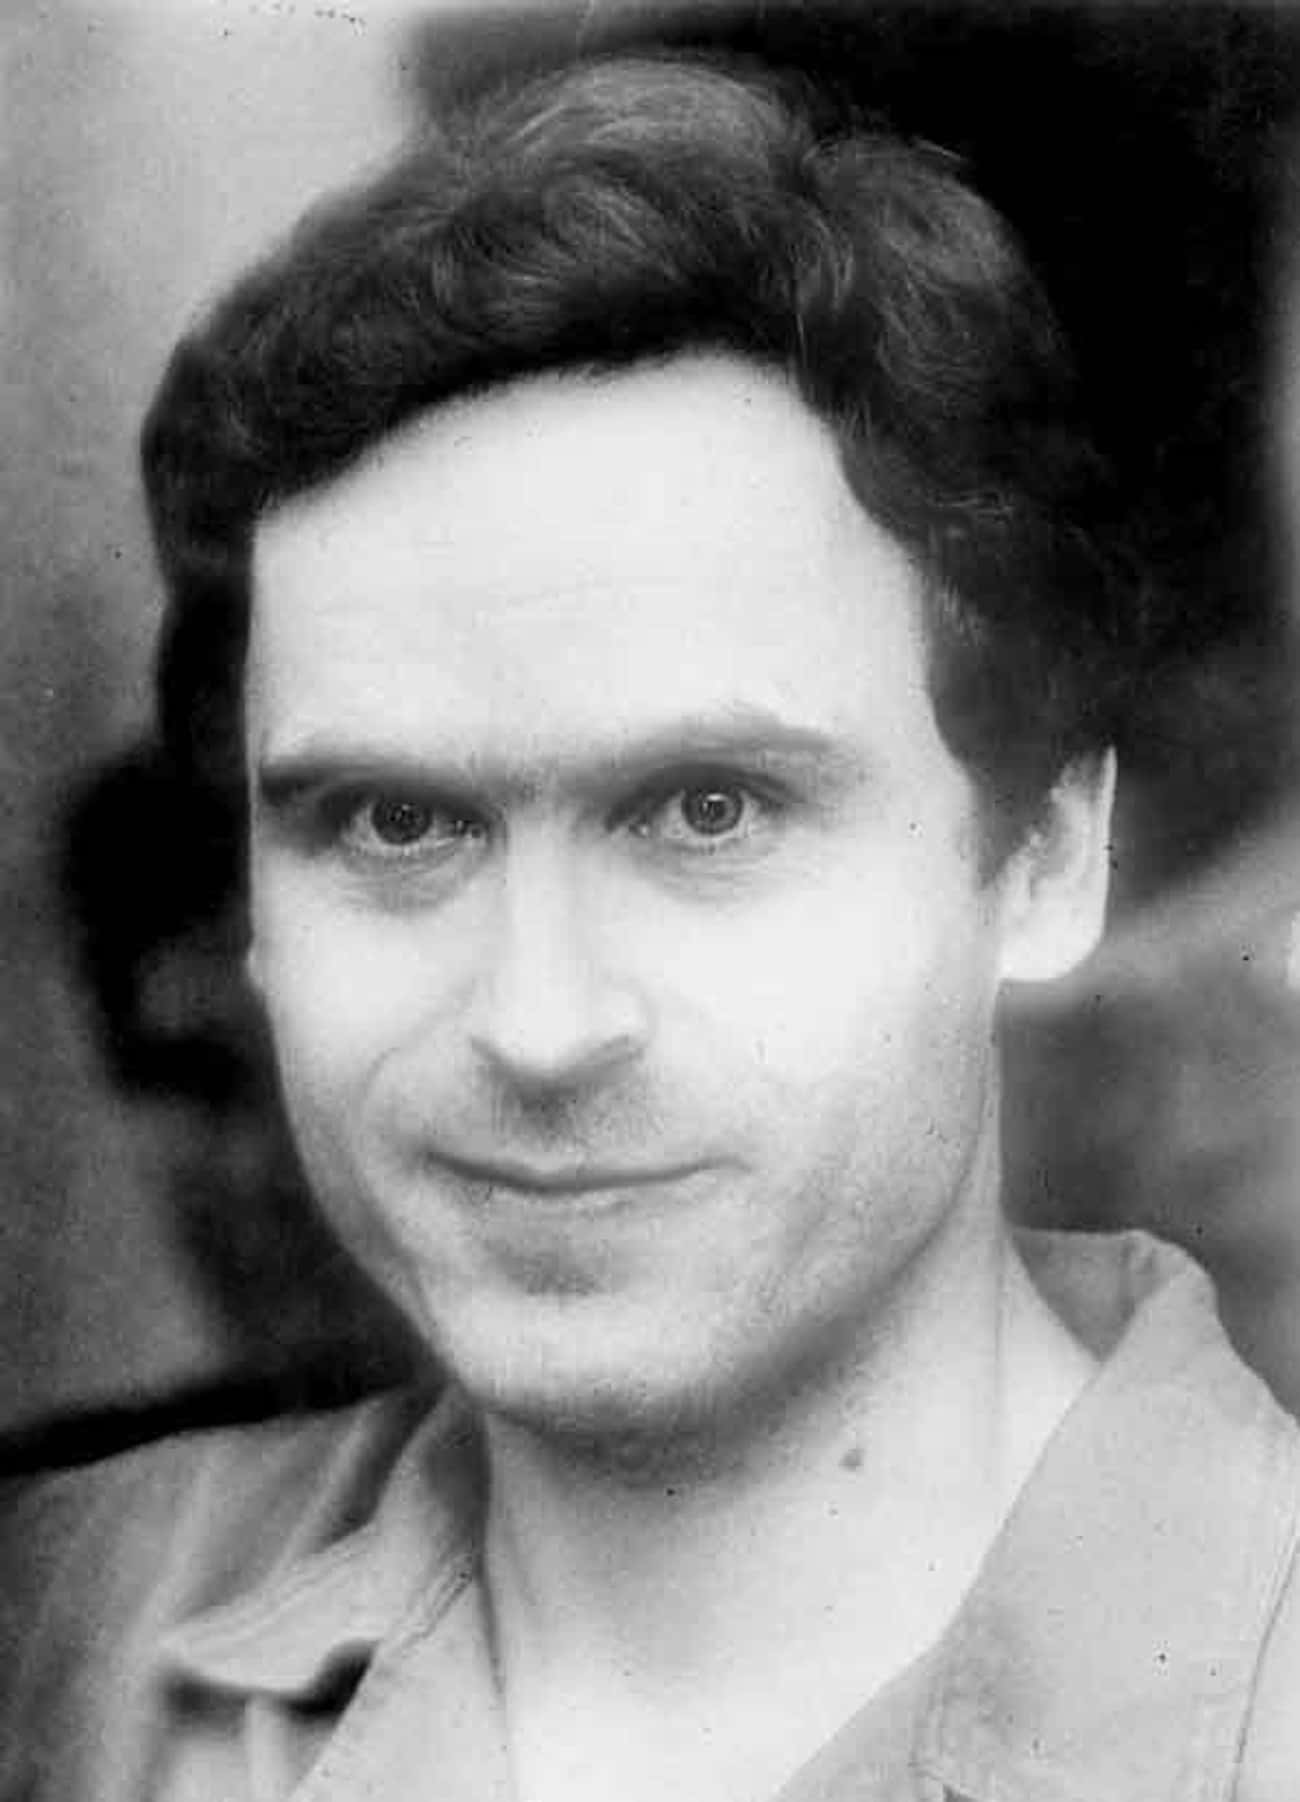 Ted Bundy Bludgeoned and Sexually Assaulted Women